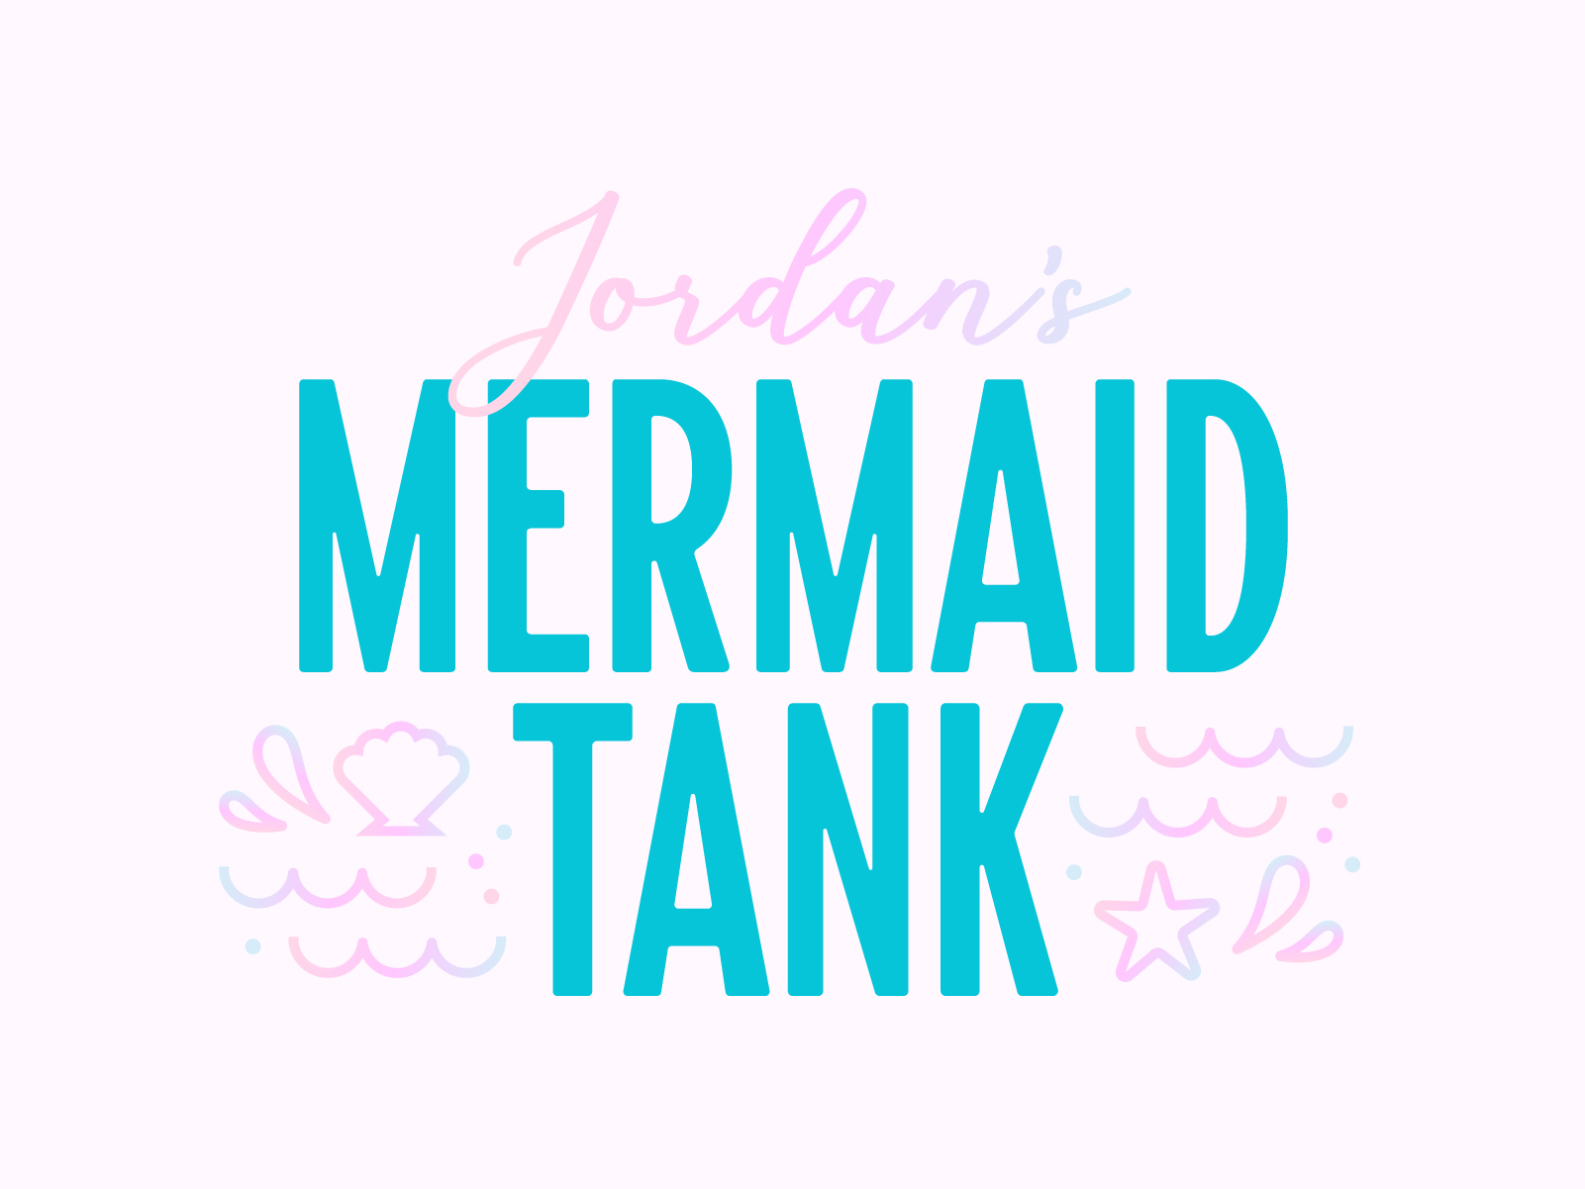 Mermaid Tank 1 by Libby Inlow on Dribbble